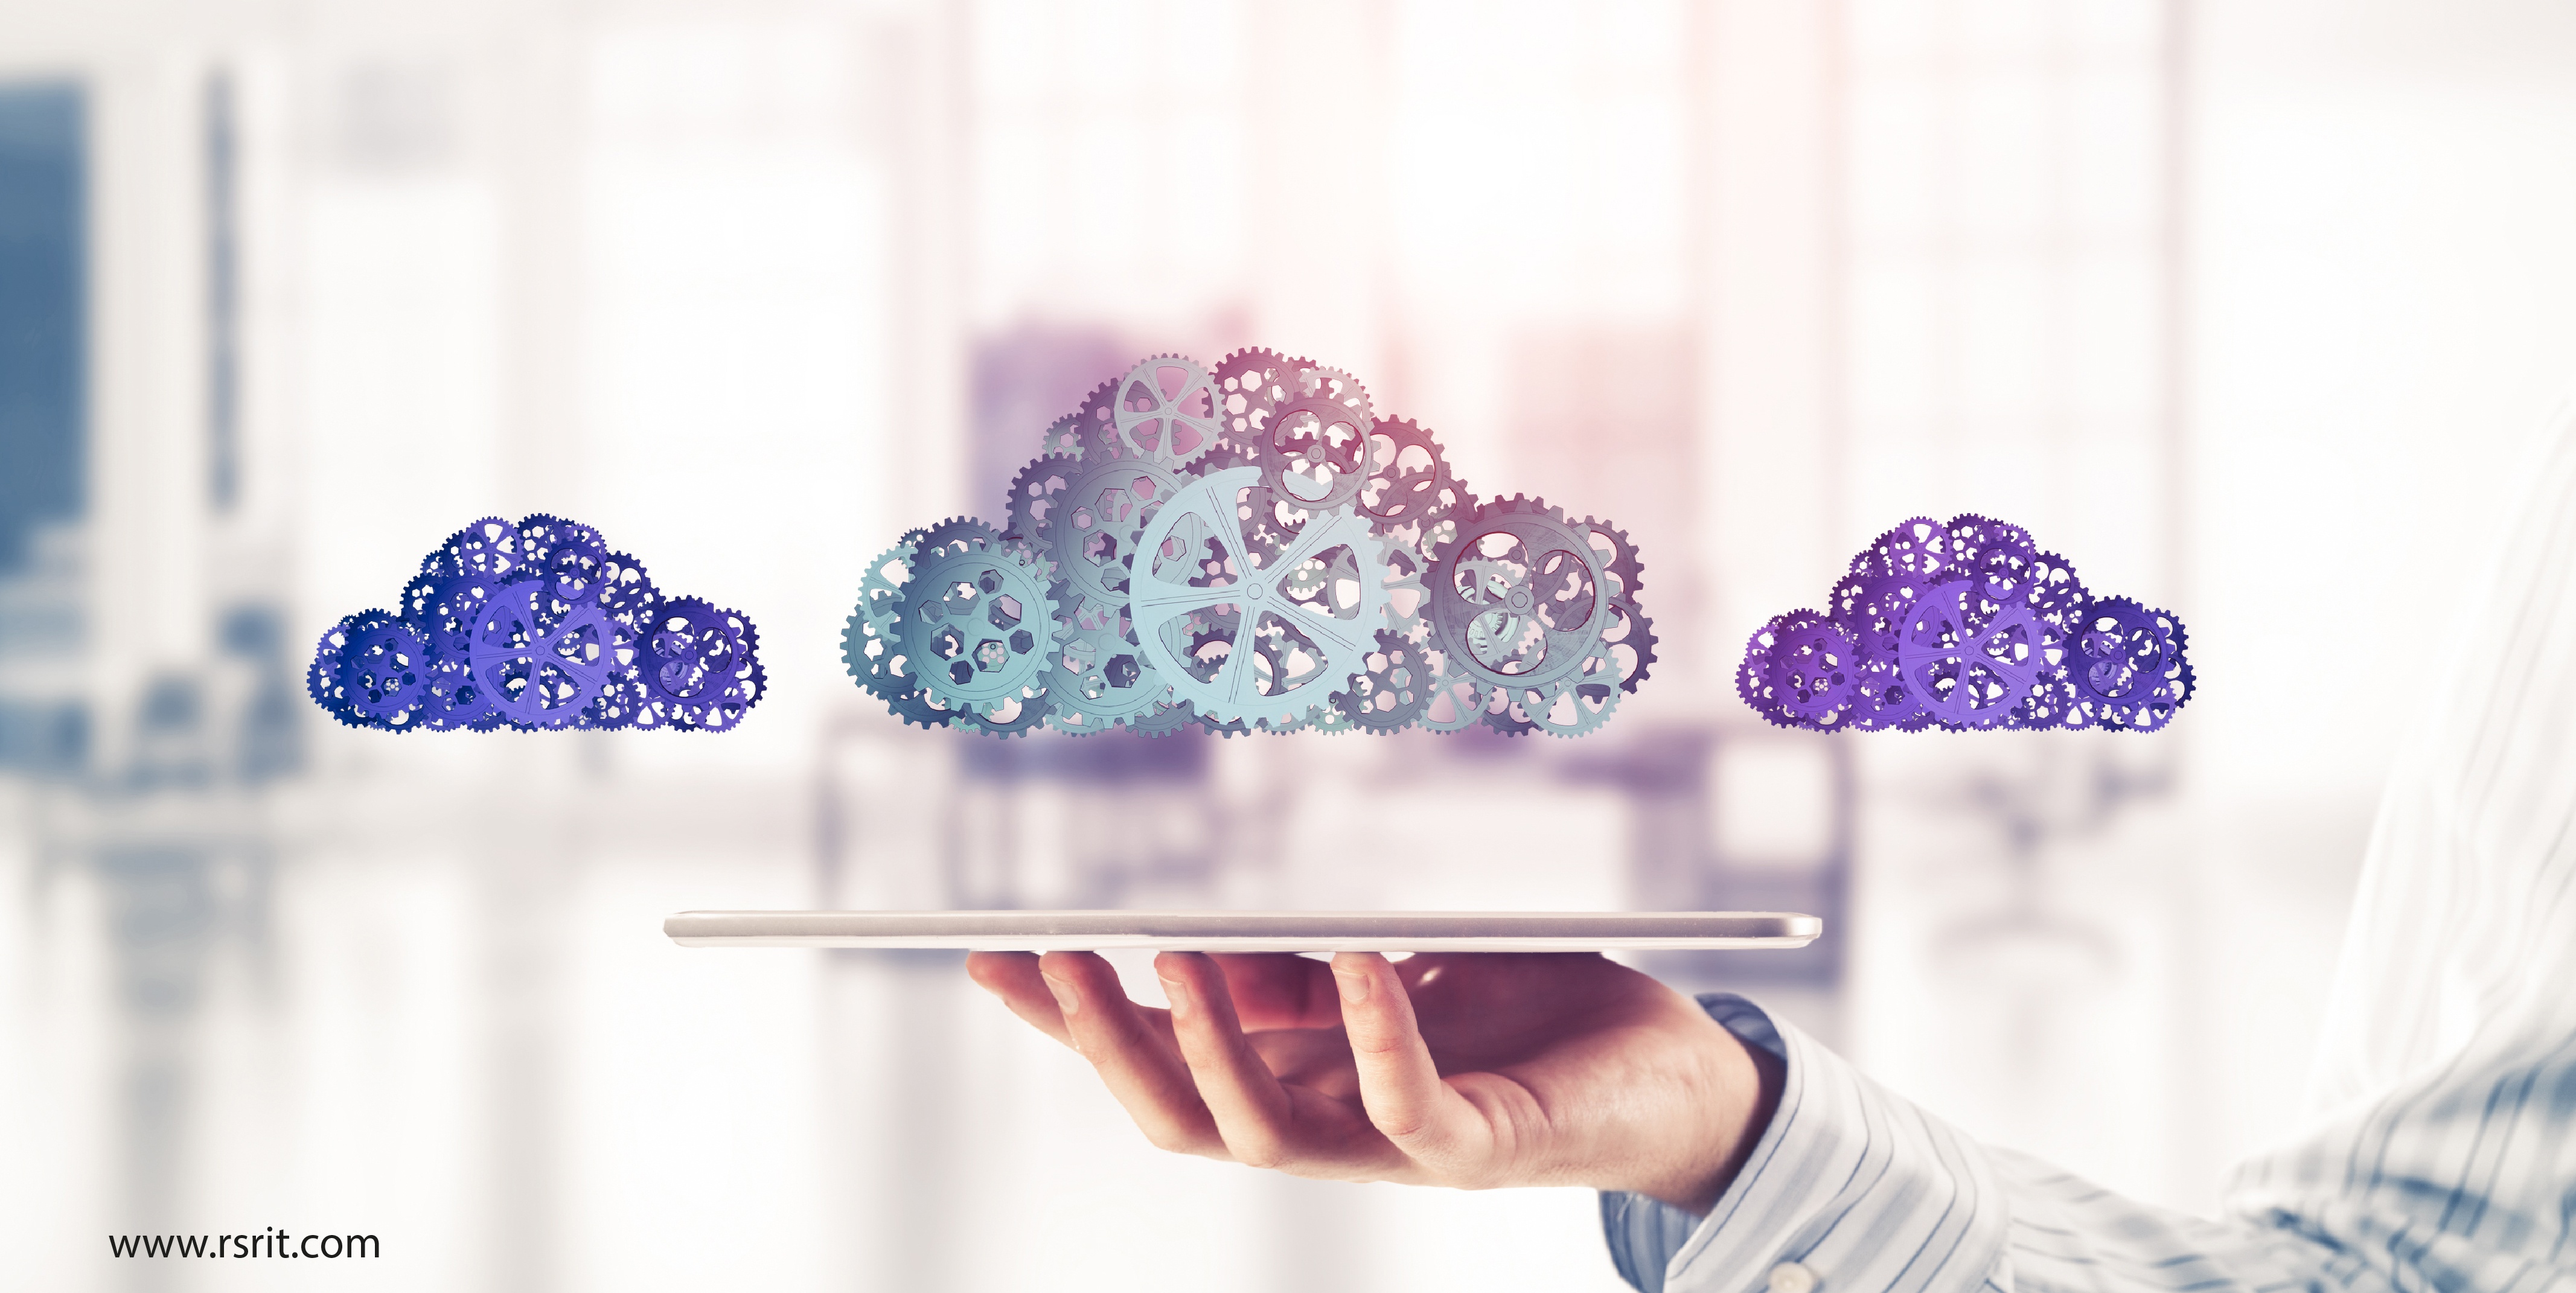 Three reasons companies need to embrace multi-cloud strategy